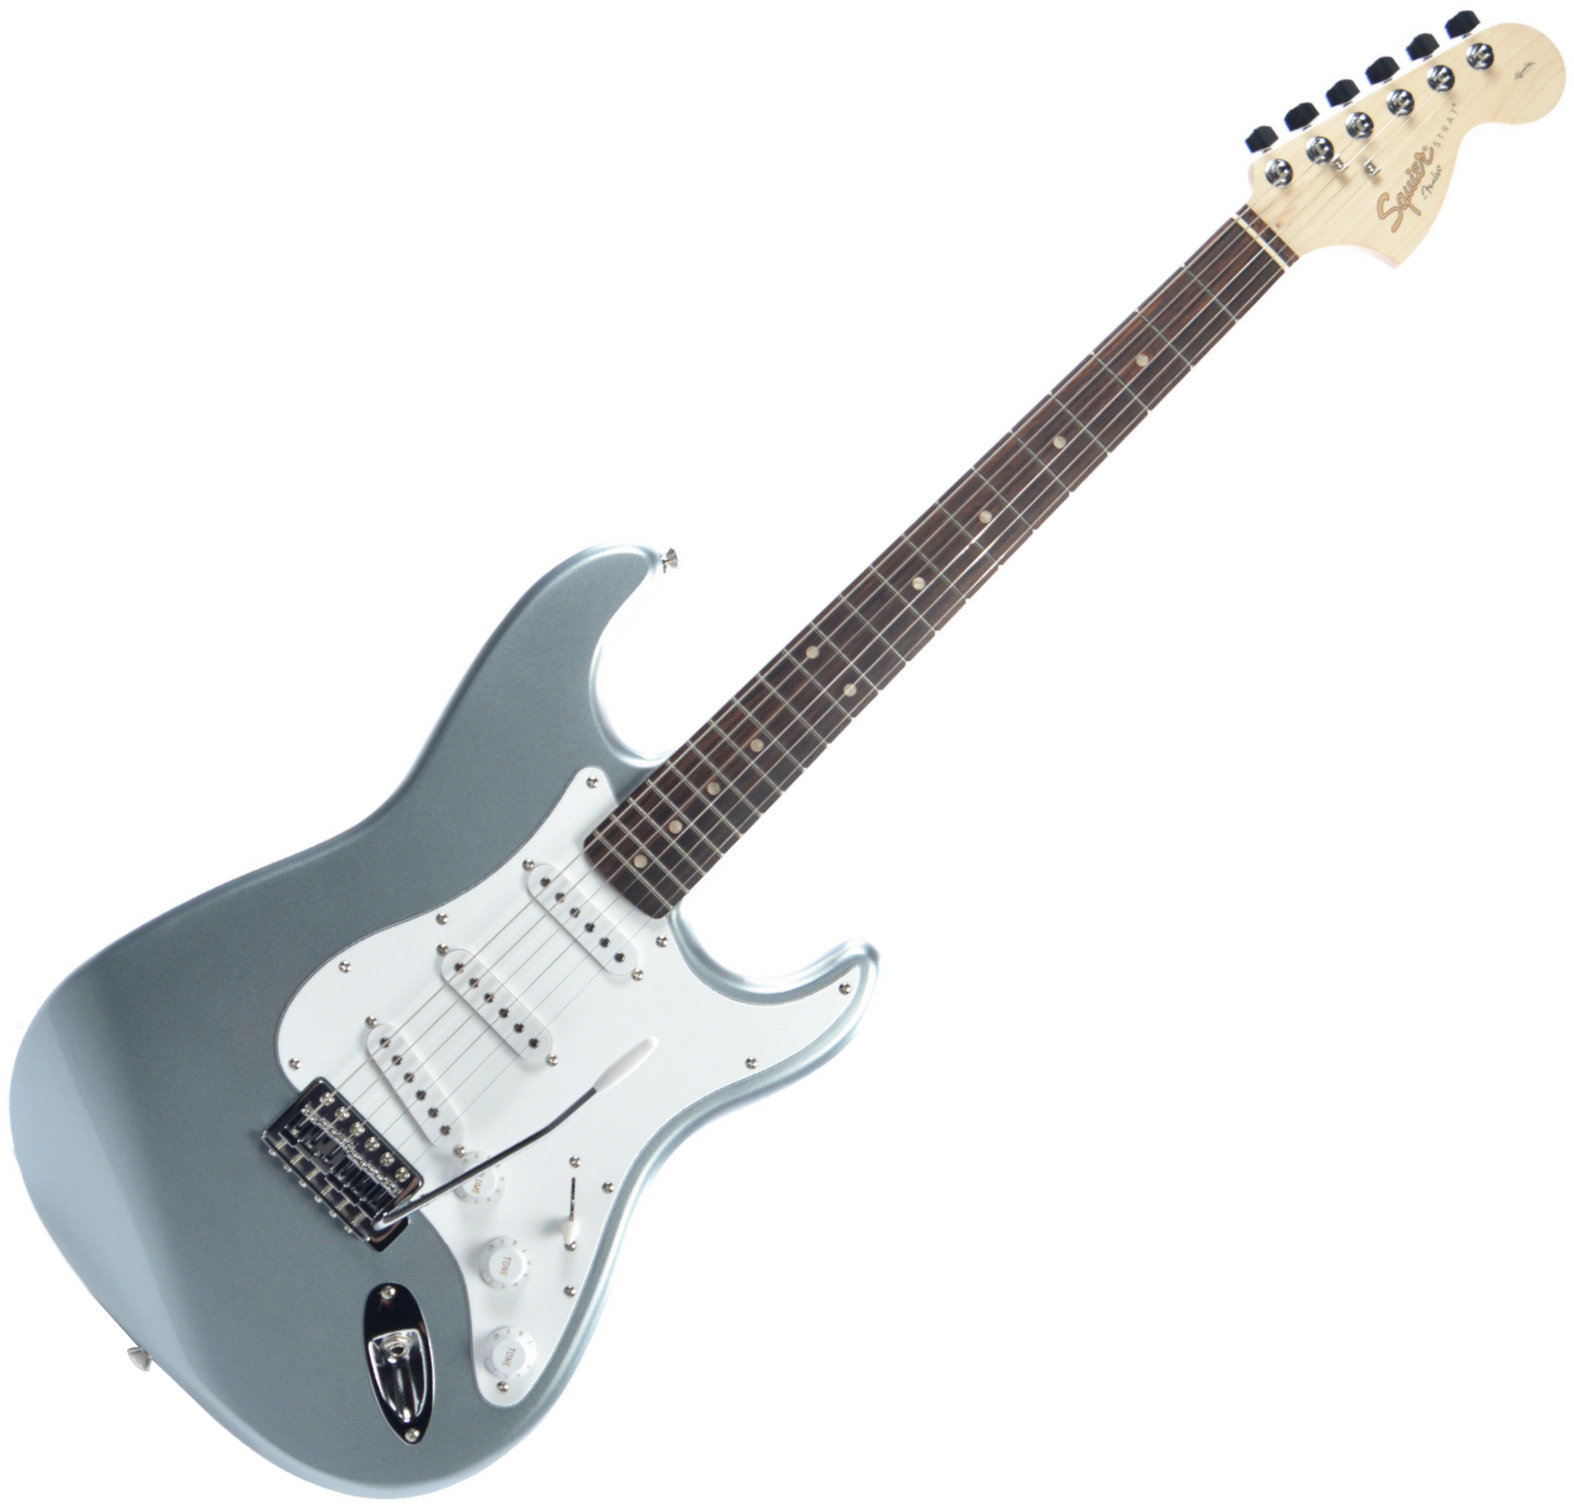 Electric guitar Fender Squier Affinity Stratocaster RW Slick Silver